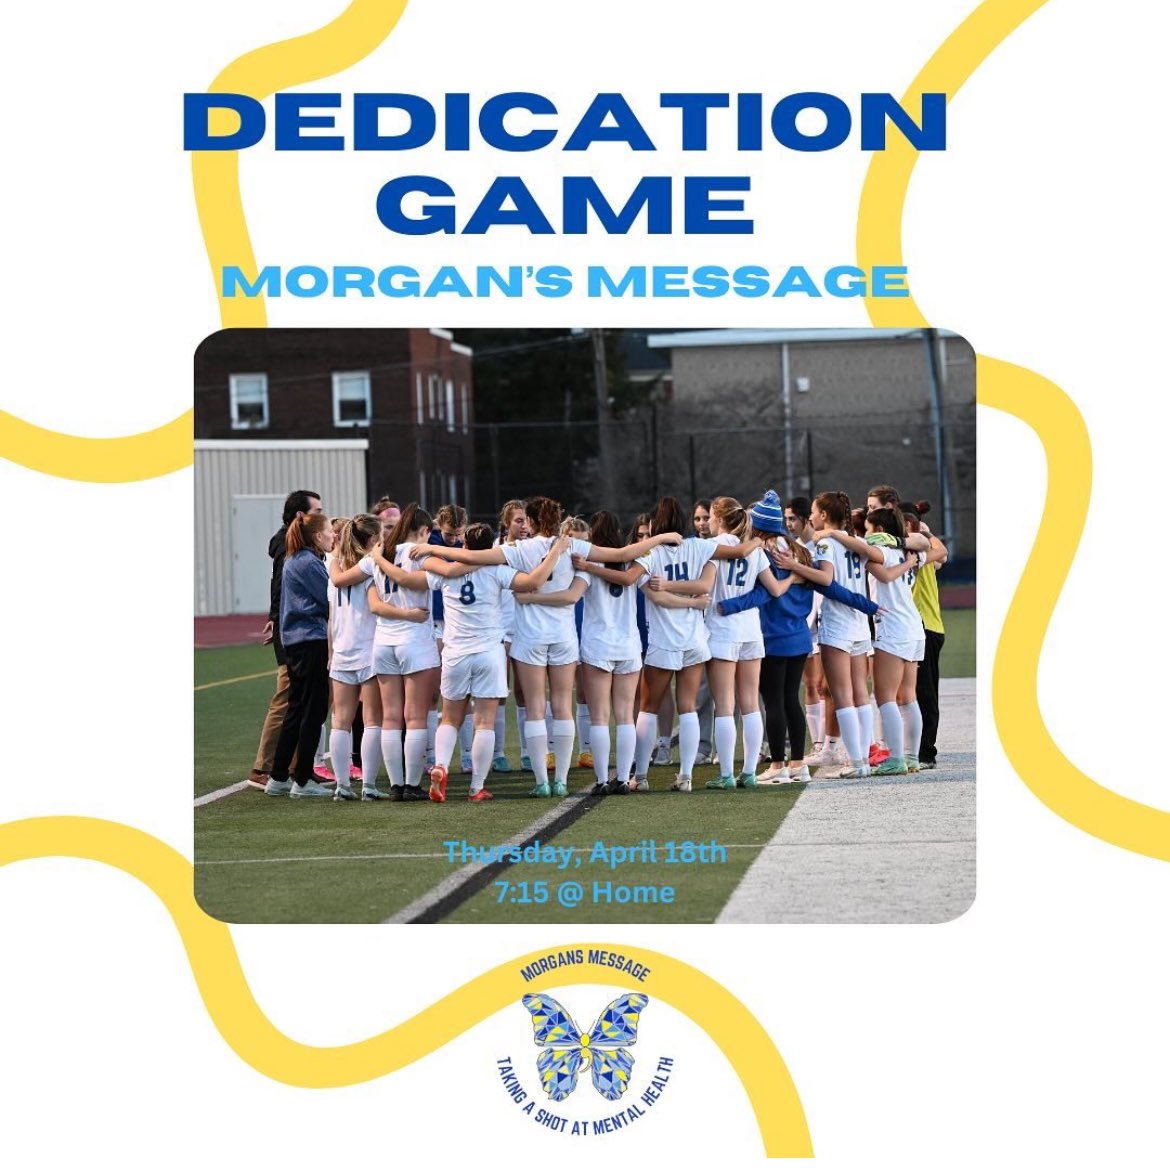 Last week we dedicated our varsity girls soccer game in support of Morgan’s Message to raise awareness for student athlete mental health @MorgansMessage 🦋@RobinsonRams 💙💛#MentalHealthMatters